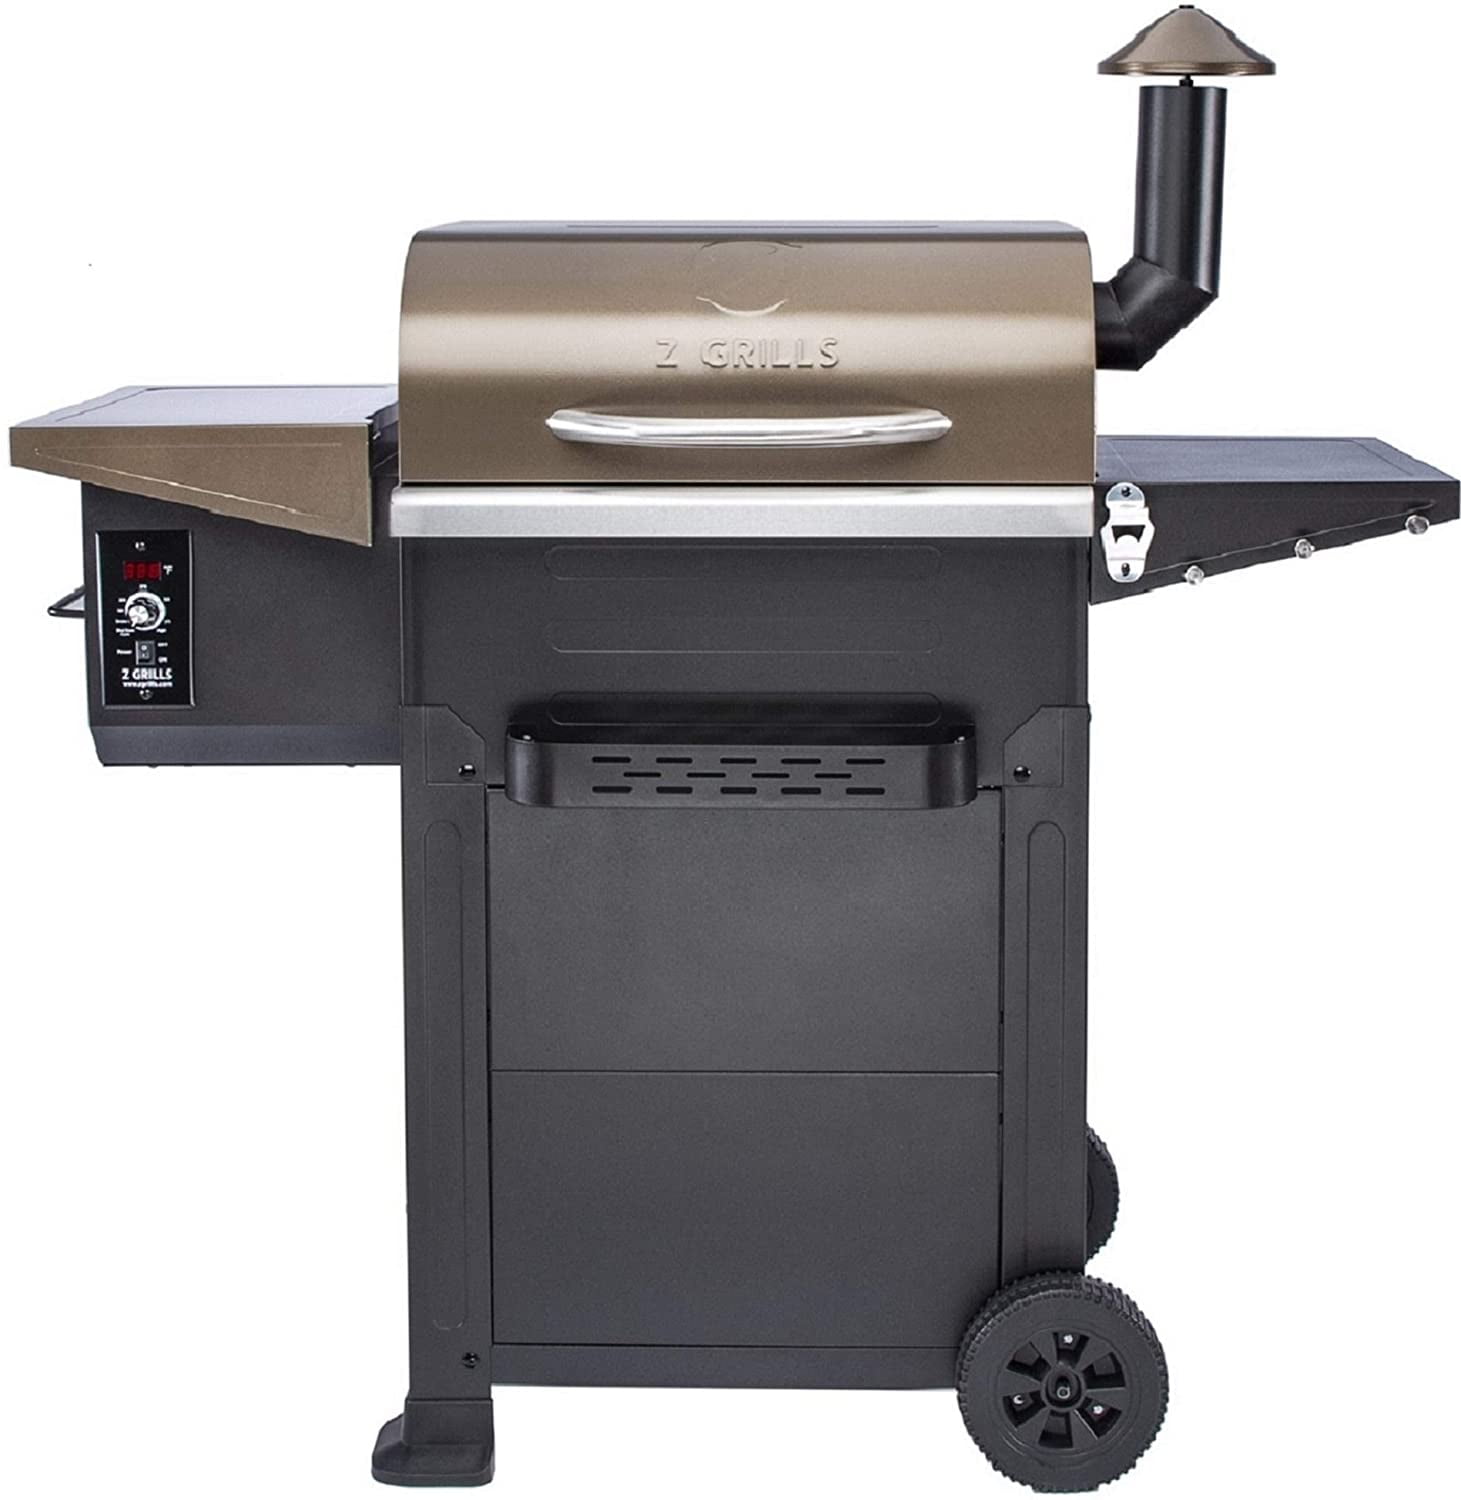 Z Grills L6002b Smart Wood Pellet Grill 6 In1 Outdoor Bbq Smoker 600 Sq Inches Cooking Area Walmart Com Walmart Com,What Is A Pergola Used For